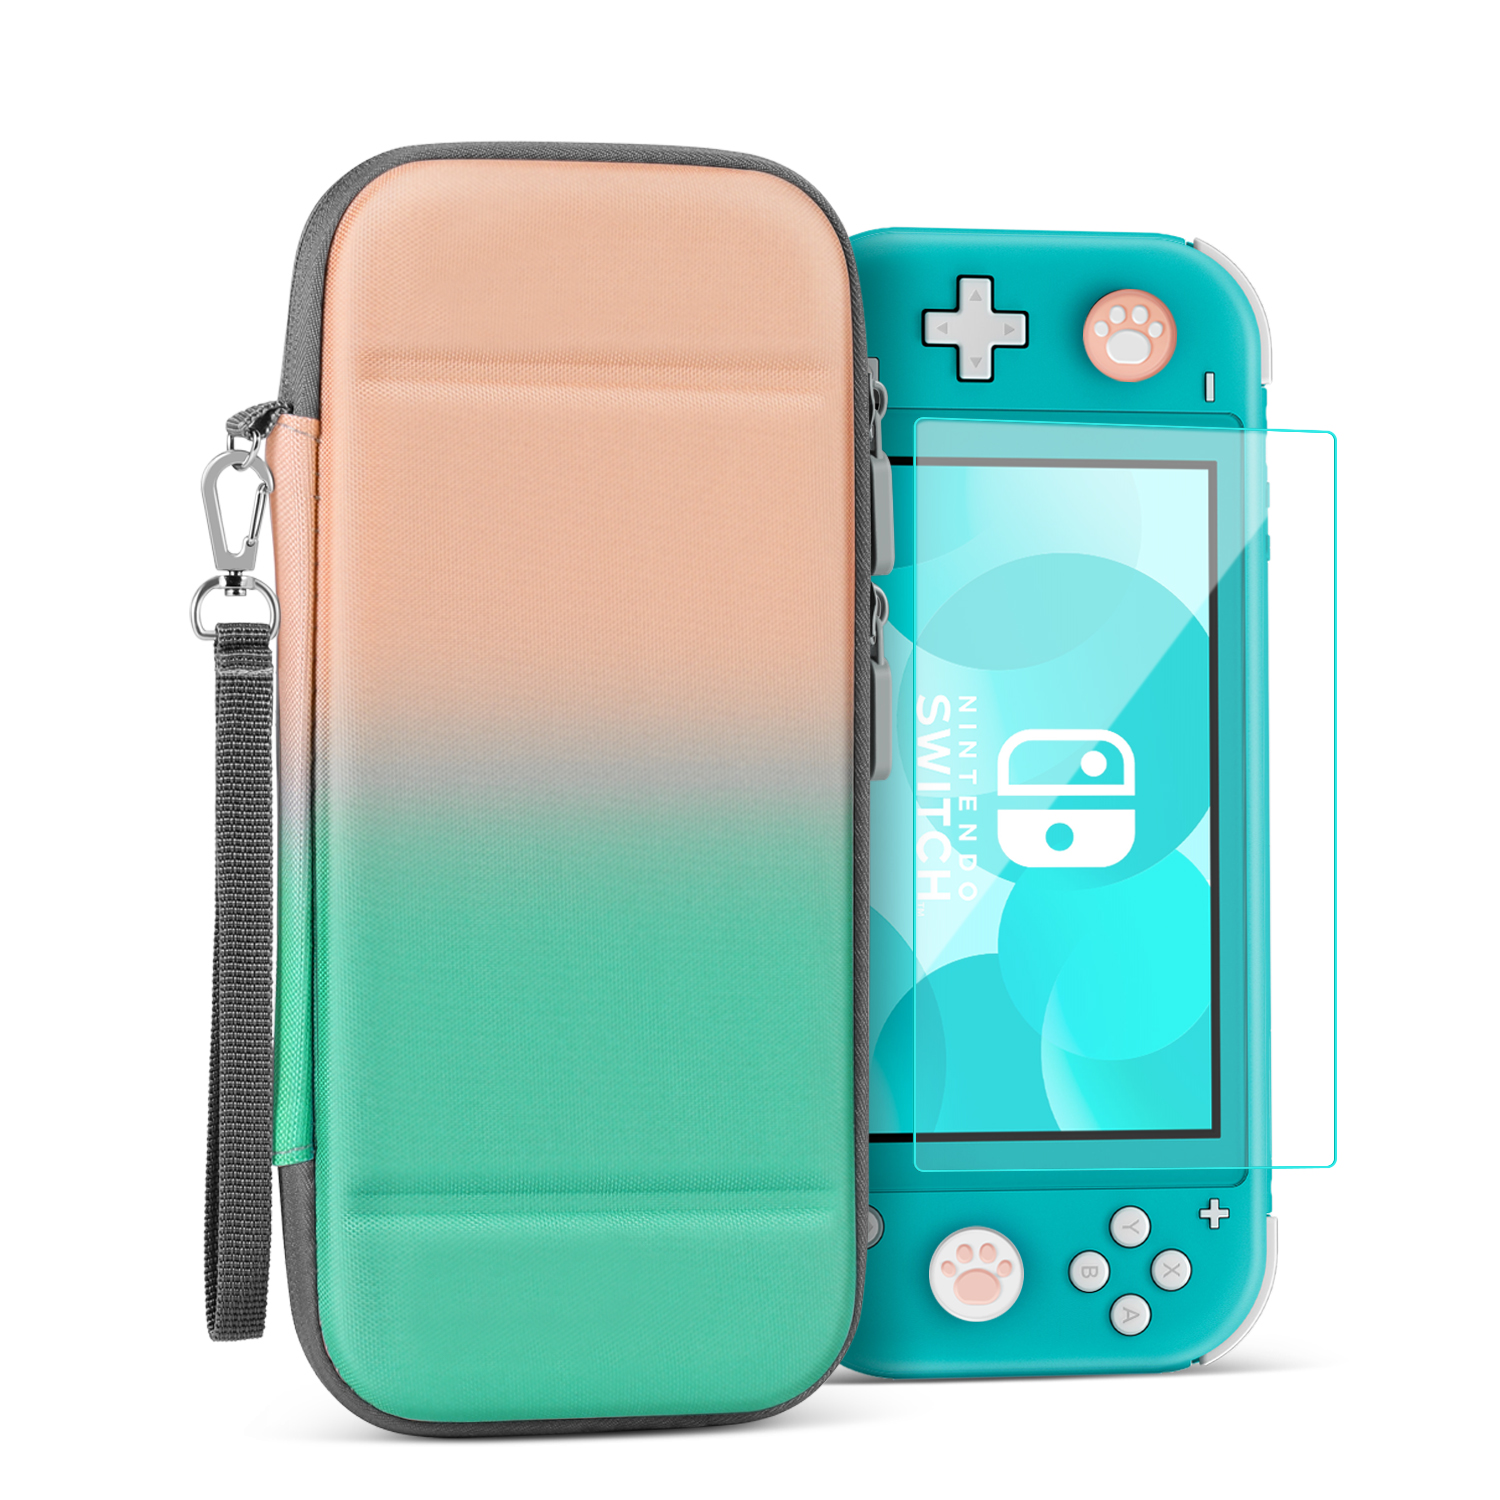 Carrying Case for Nintendo Switch Lite, Green Orange - Kawaii Cute Portable Travel Case, Protective Storage Carry Bag for Girls with Screen Protector, 10 Game Cartridge Holder